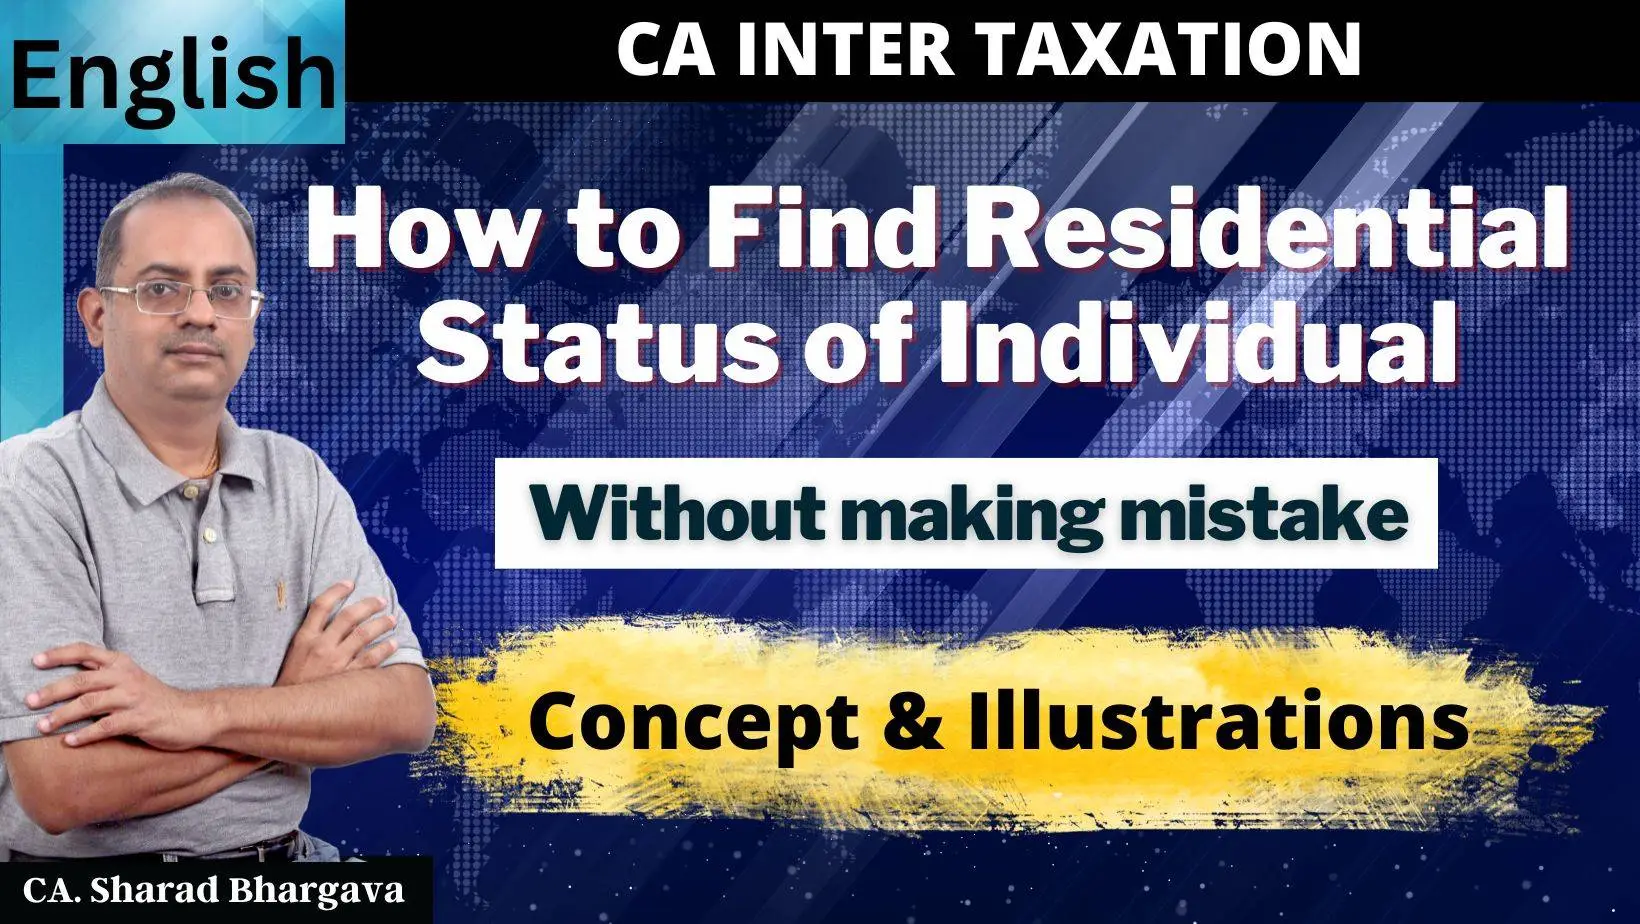 (English) / How to find residential status of individual / Concept & Examples / CA. Sharad Bhargava